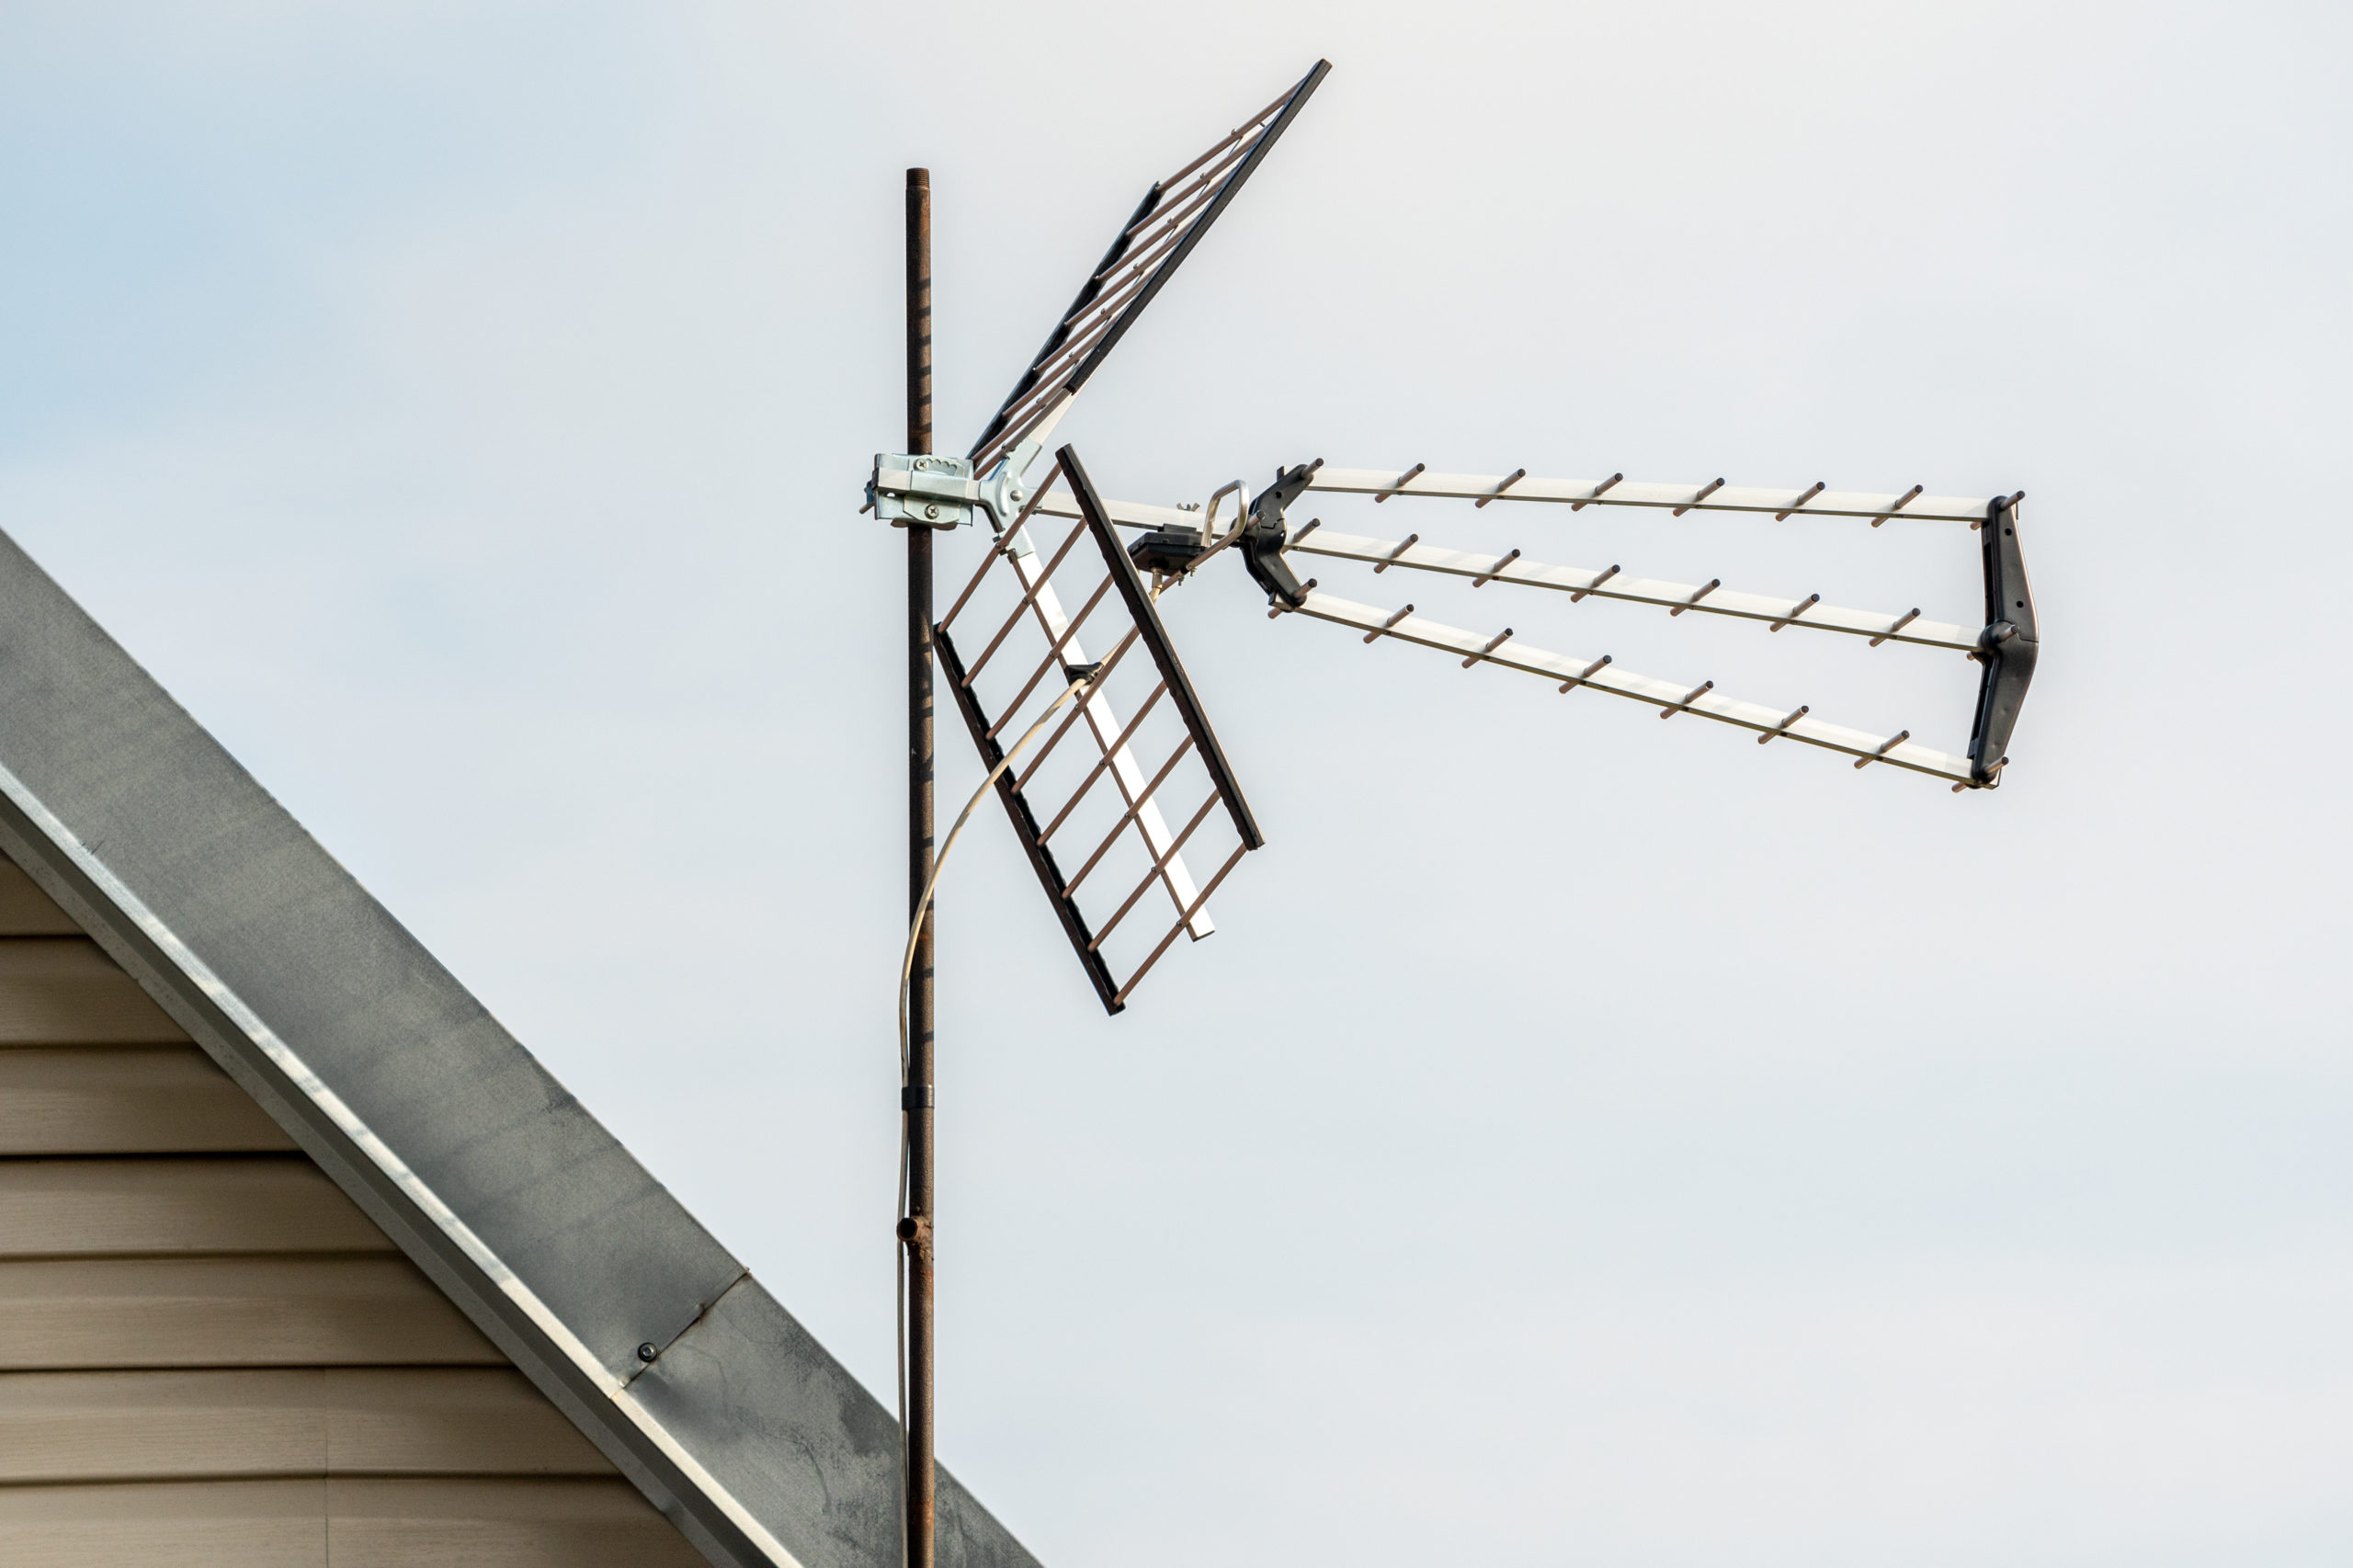 Best TV antennas for rural areas and tips for improving reception - The  Free TV Project